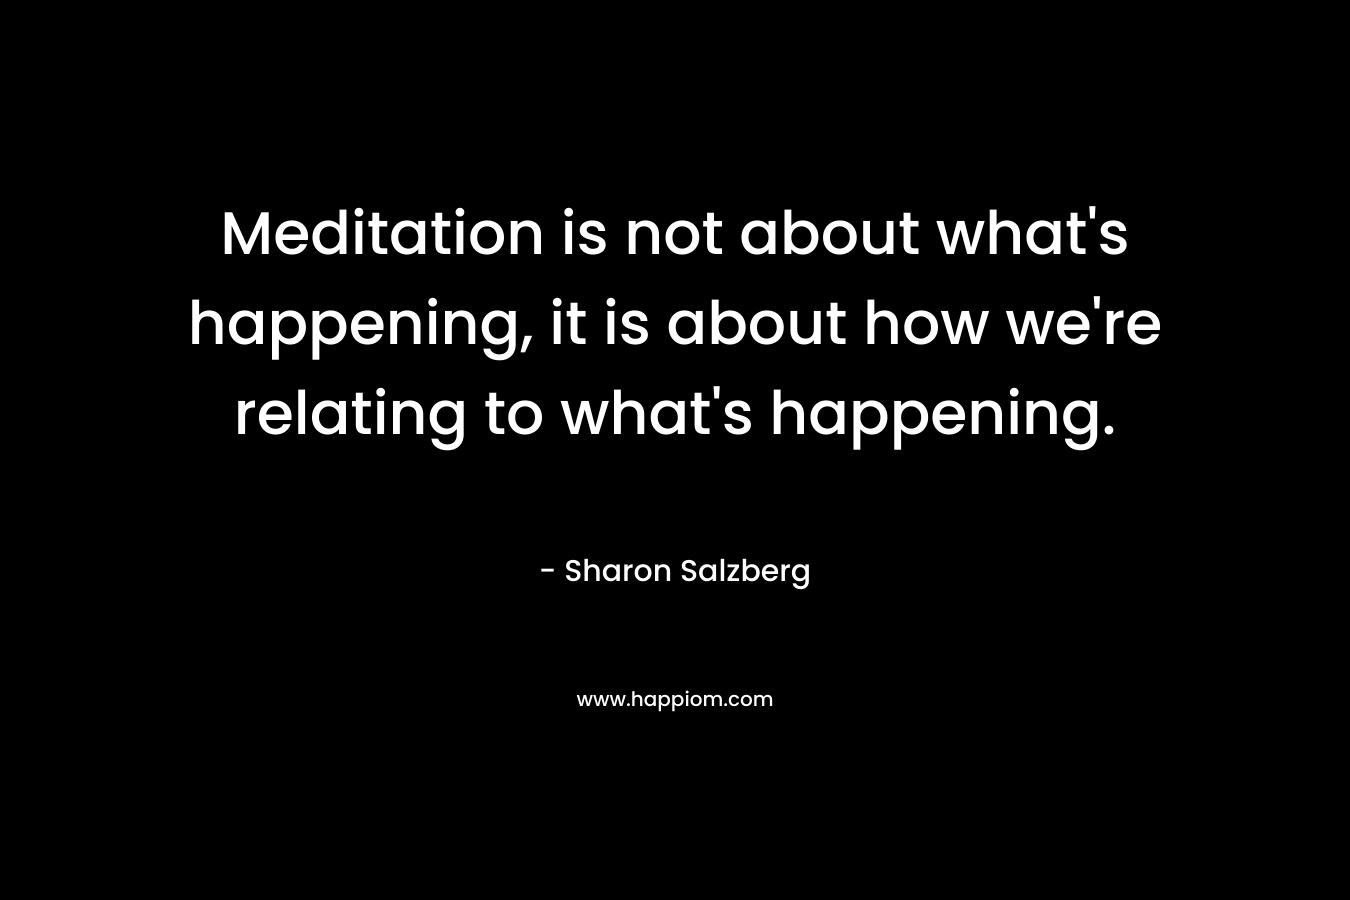 Meditation is not about what's happening, it is about how we're relating to what's happening.